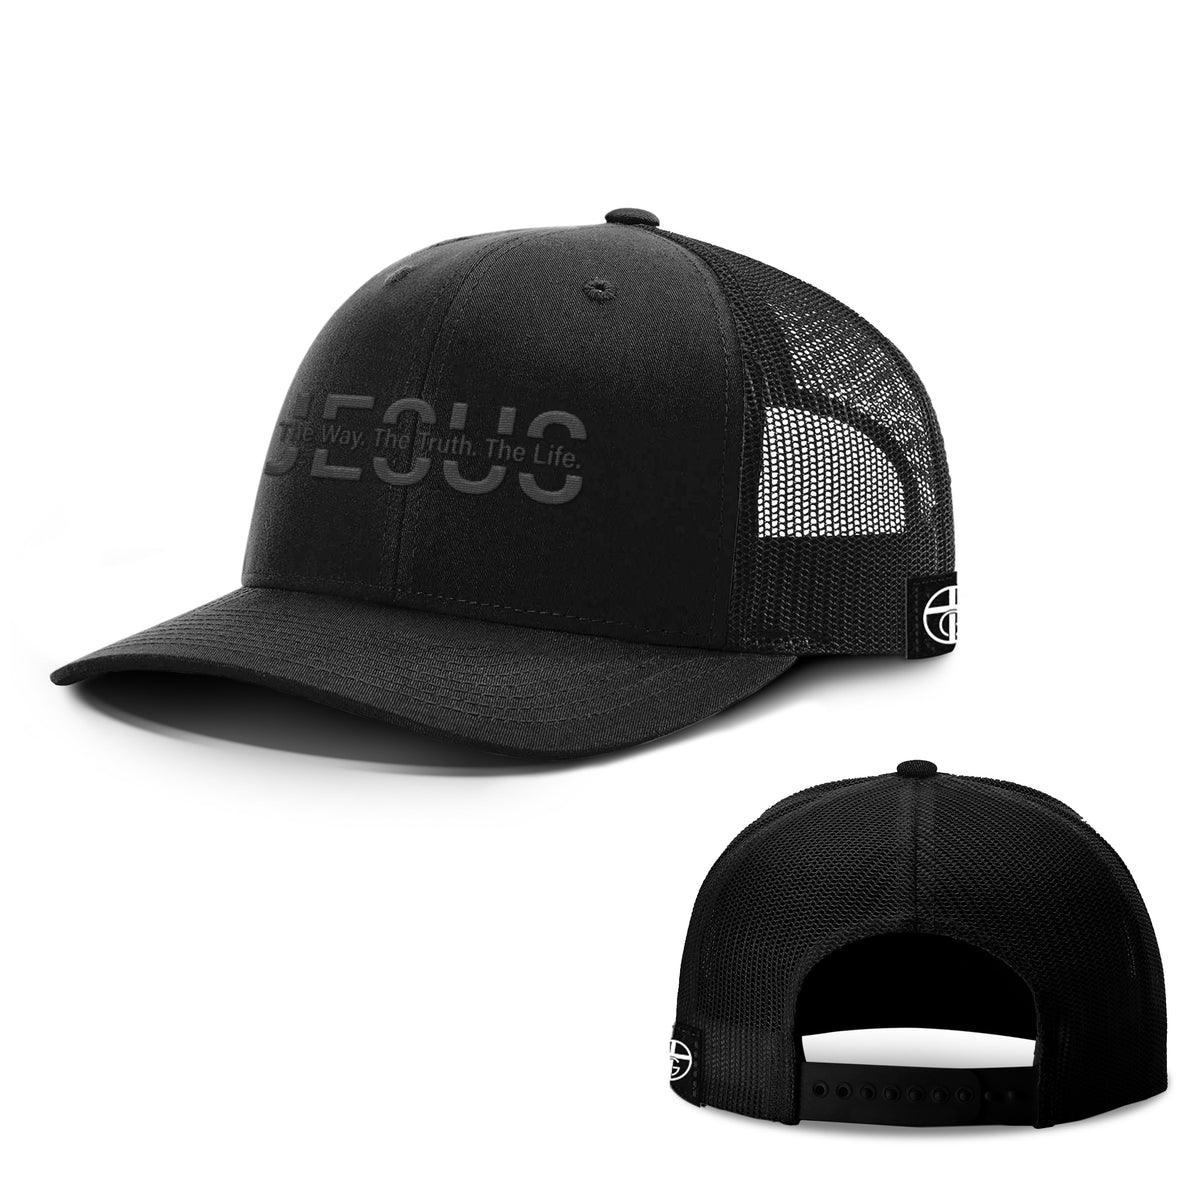 Jesus The Way. The Truth. The Life. Blackout Version Hats